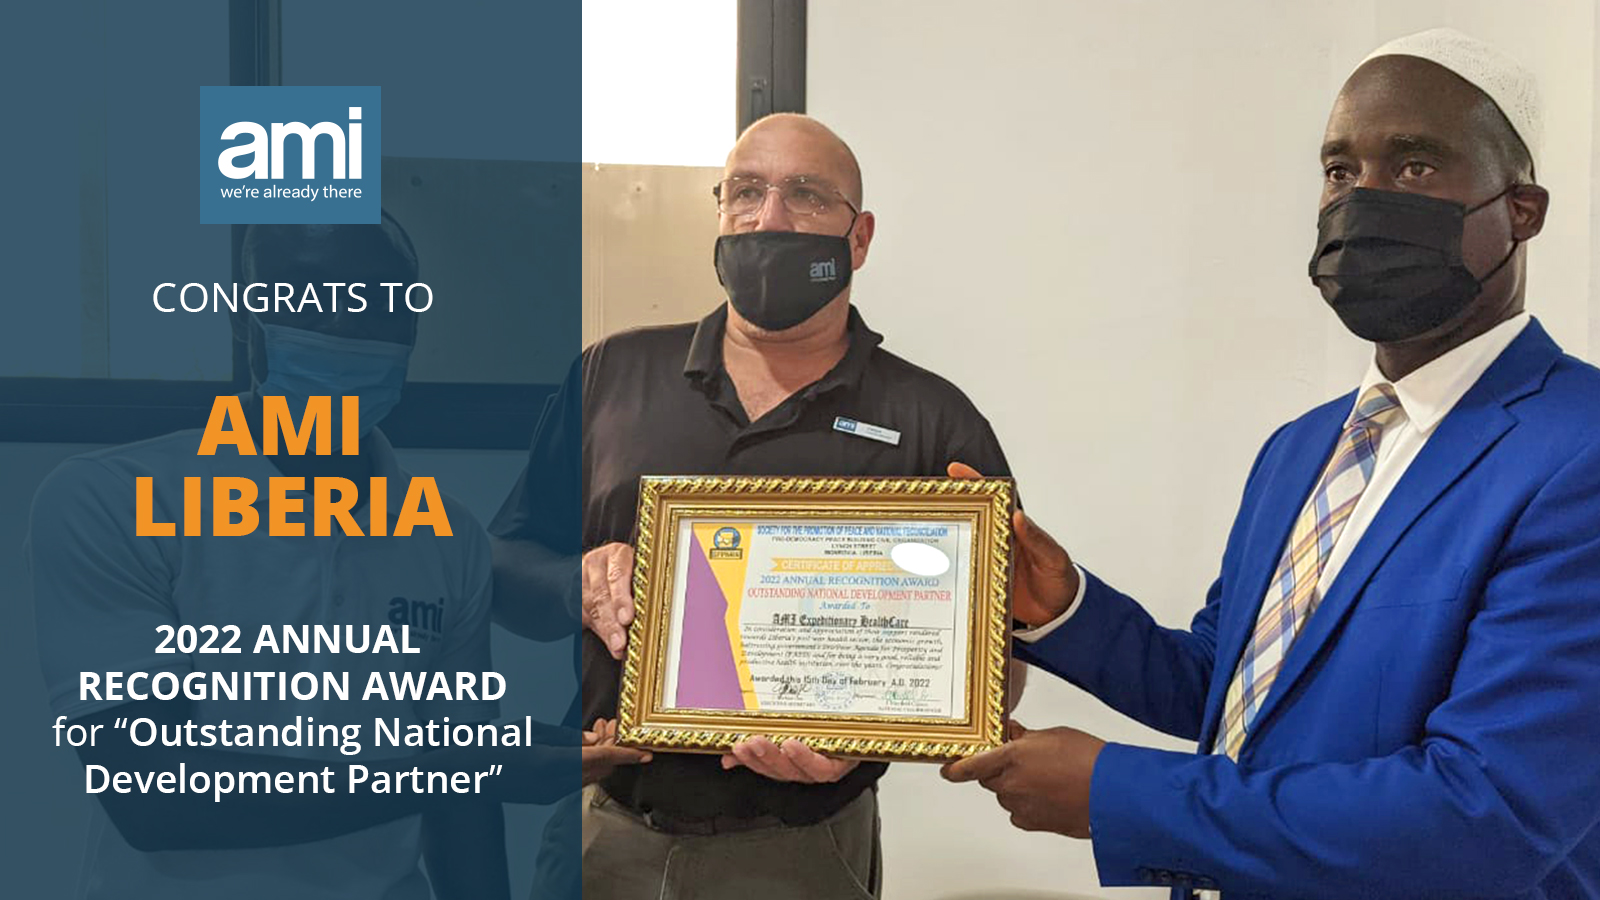 AMI Liberia presented with 2022 annual recognition award for outstanding national development partner